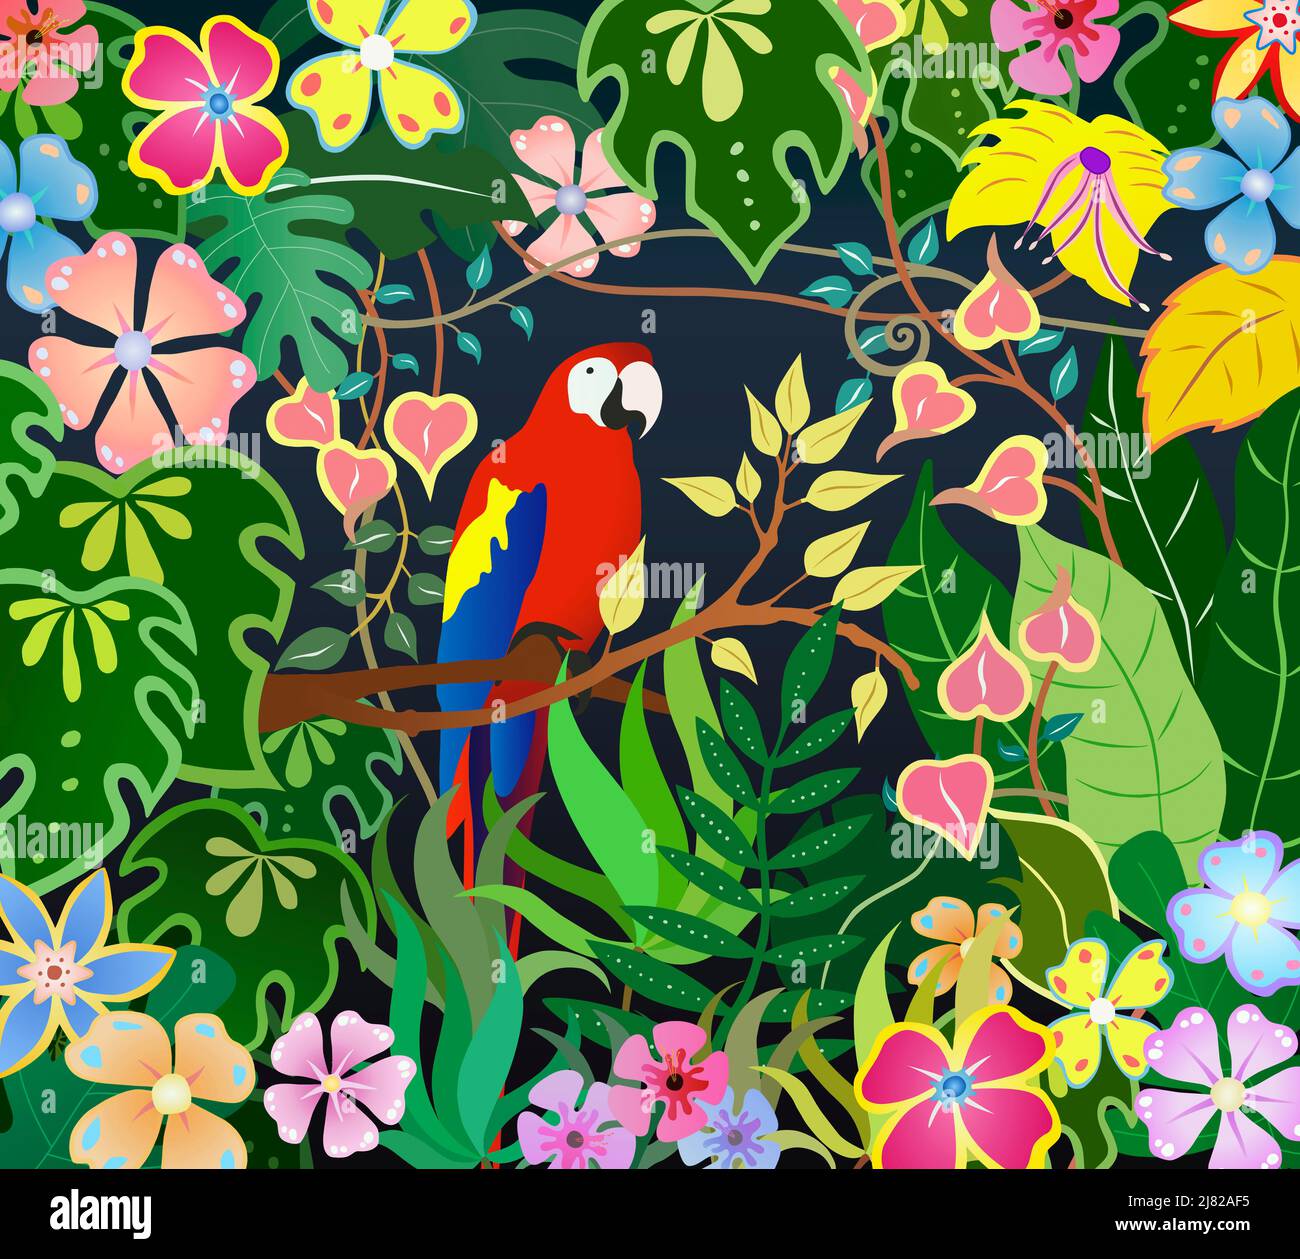 Digital illustration of a brightly-coloured parrot in a jungle setting Stock Photo